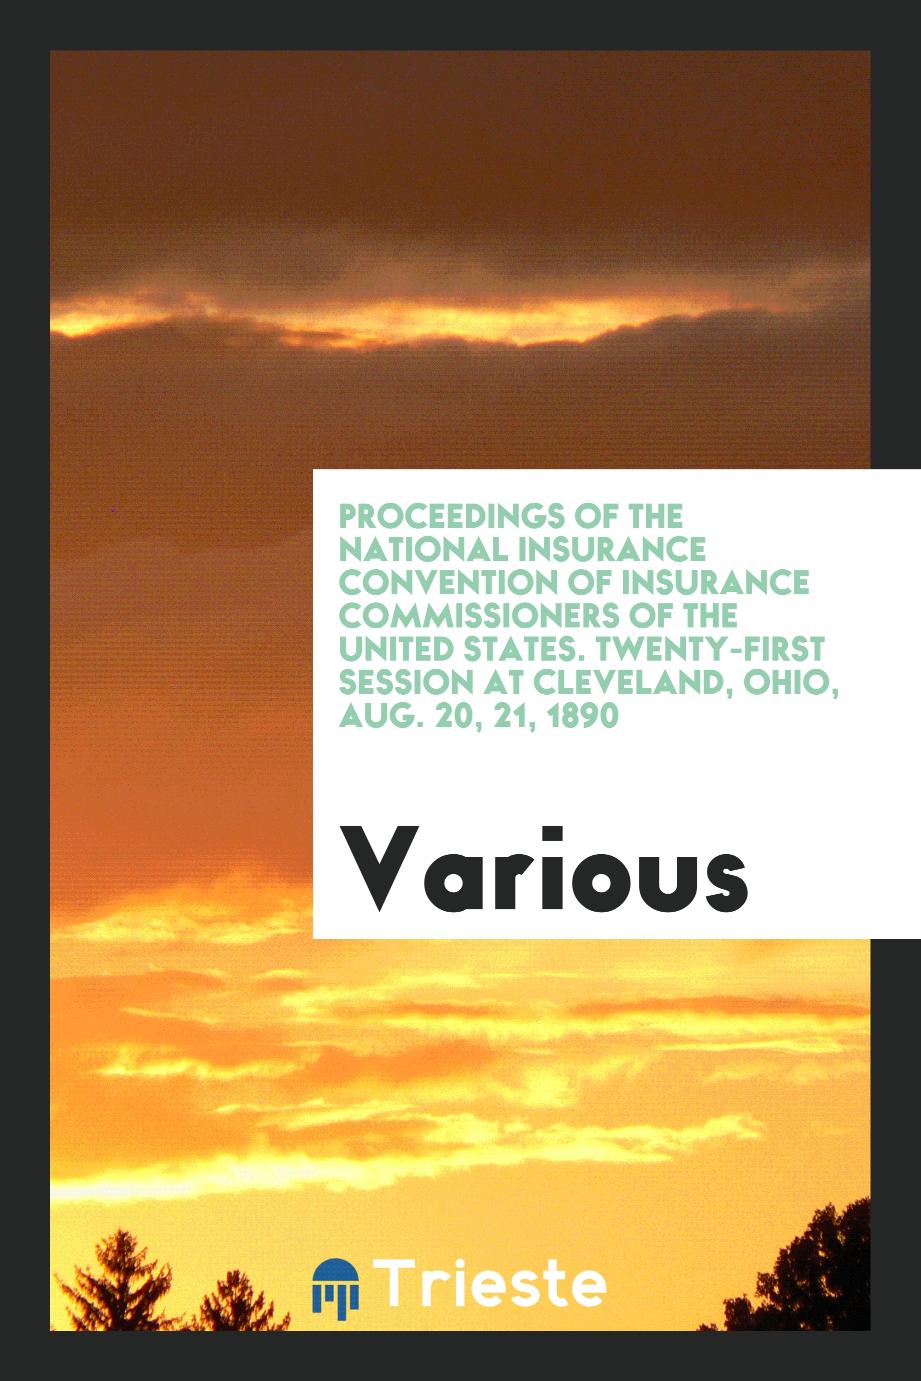 Proceedings of the National Insurance Convention of Insurance Commissioners of the United States. Twenty-first session at Cleveland, Ohio, Aug. 20, 21, 1890